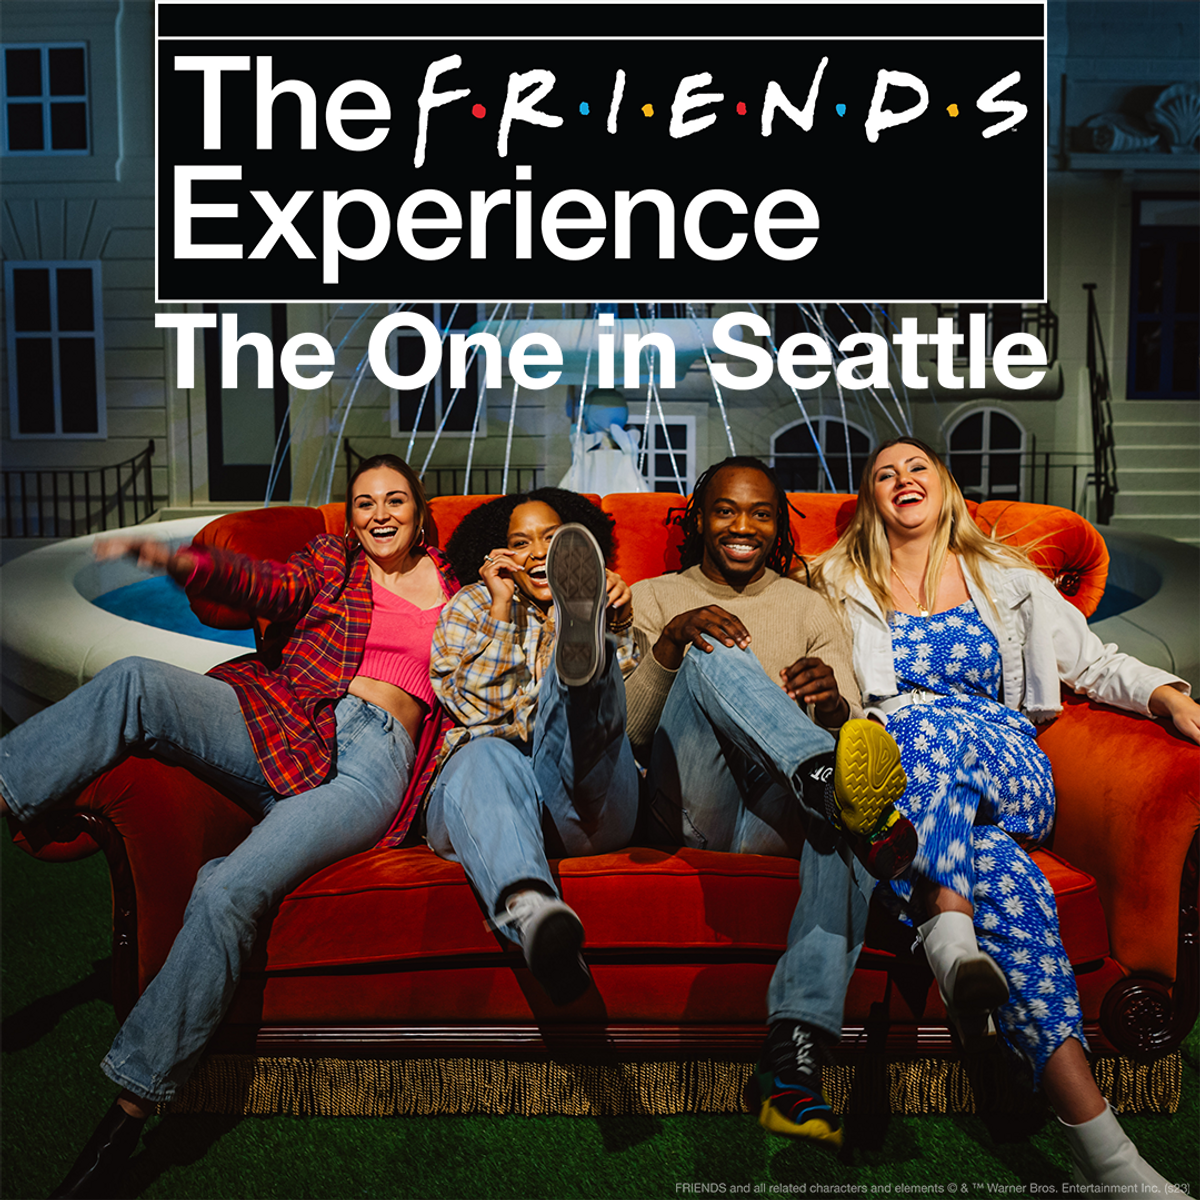 Check out 'The FRIENDS Experience' in downtown Seattle